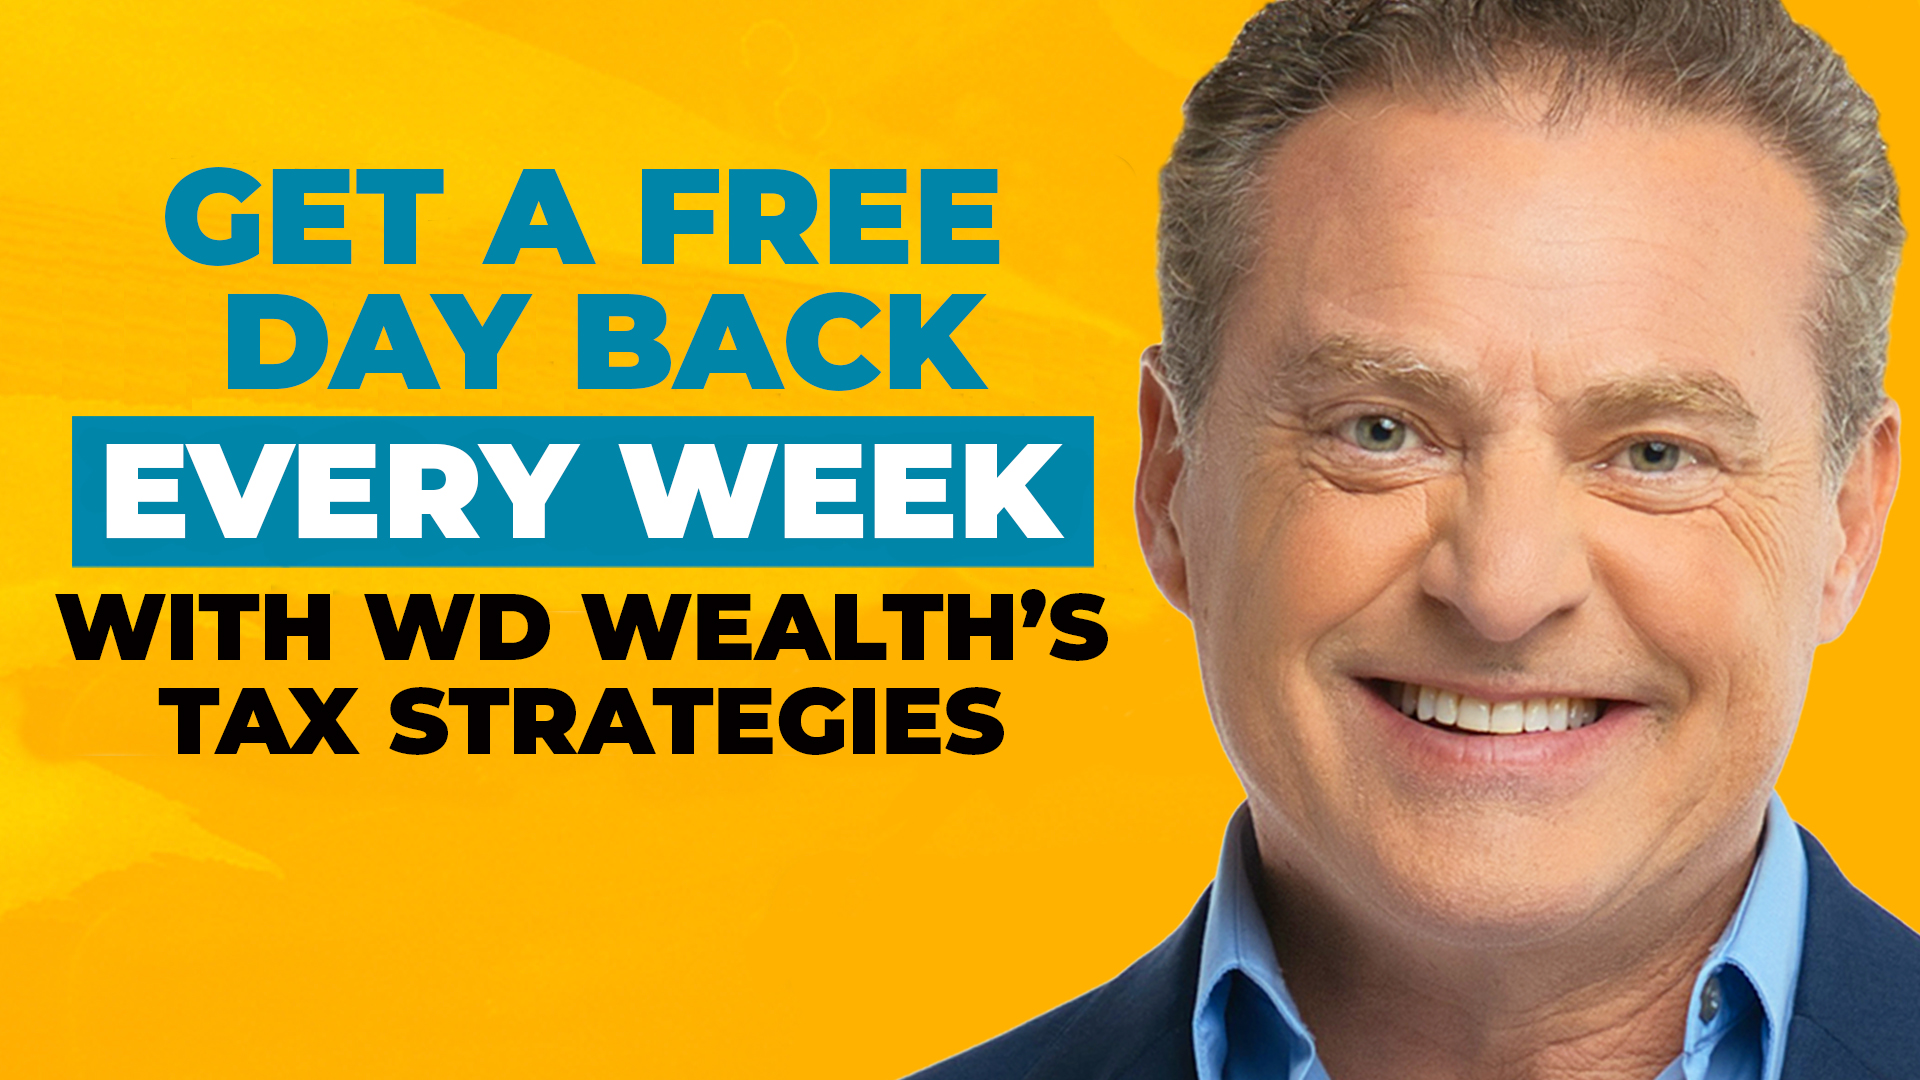 A headshot of Mike Koenigs on a bold yellow background, along with text reading "Get A Free Day Back Every Week With WD Wealth's Tax Strategies"